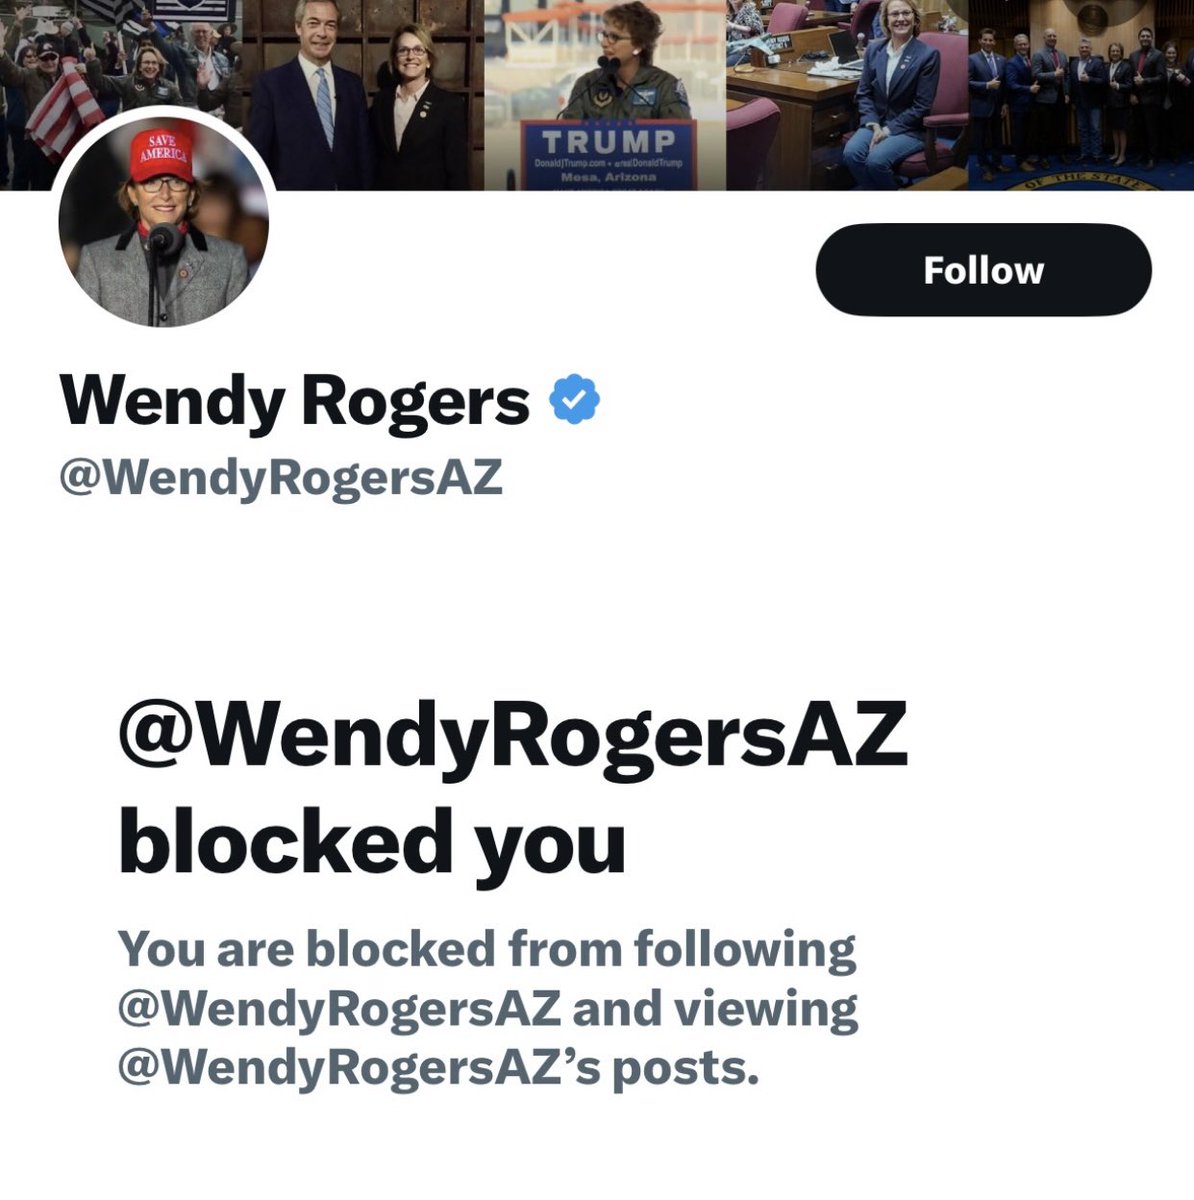 @BrianFerence1 Will she unblock all of us? 🤨 We are the American Conservative Citizens and many of us in AZ voted for her. Unacceptable!